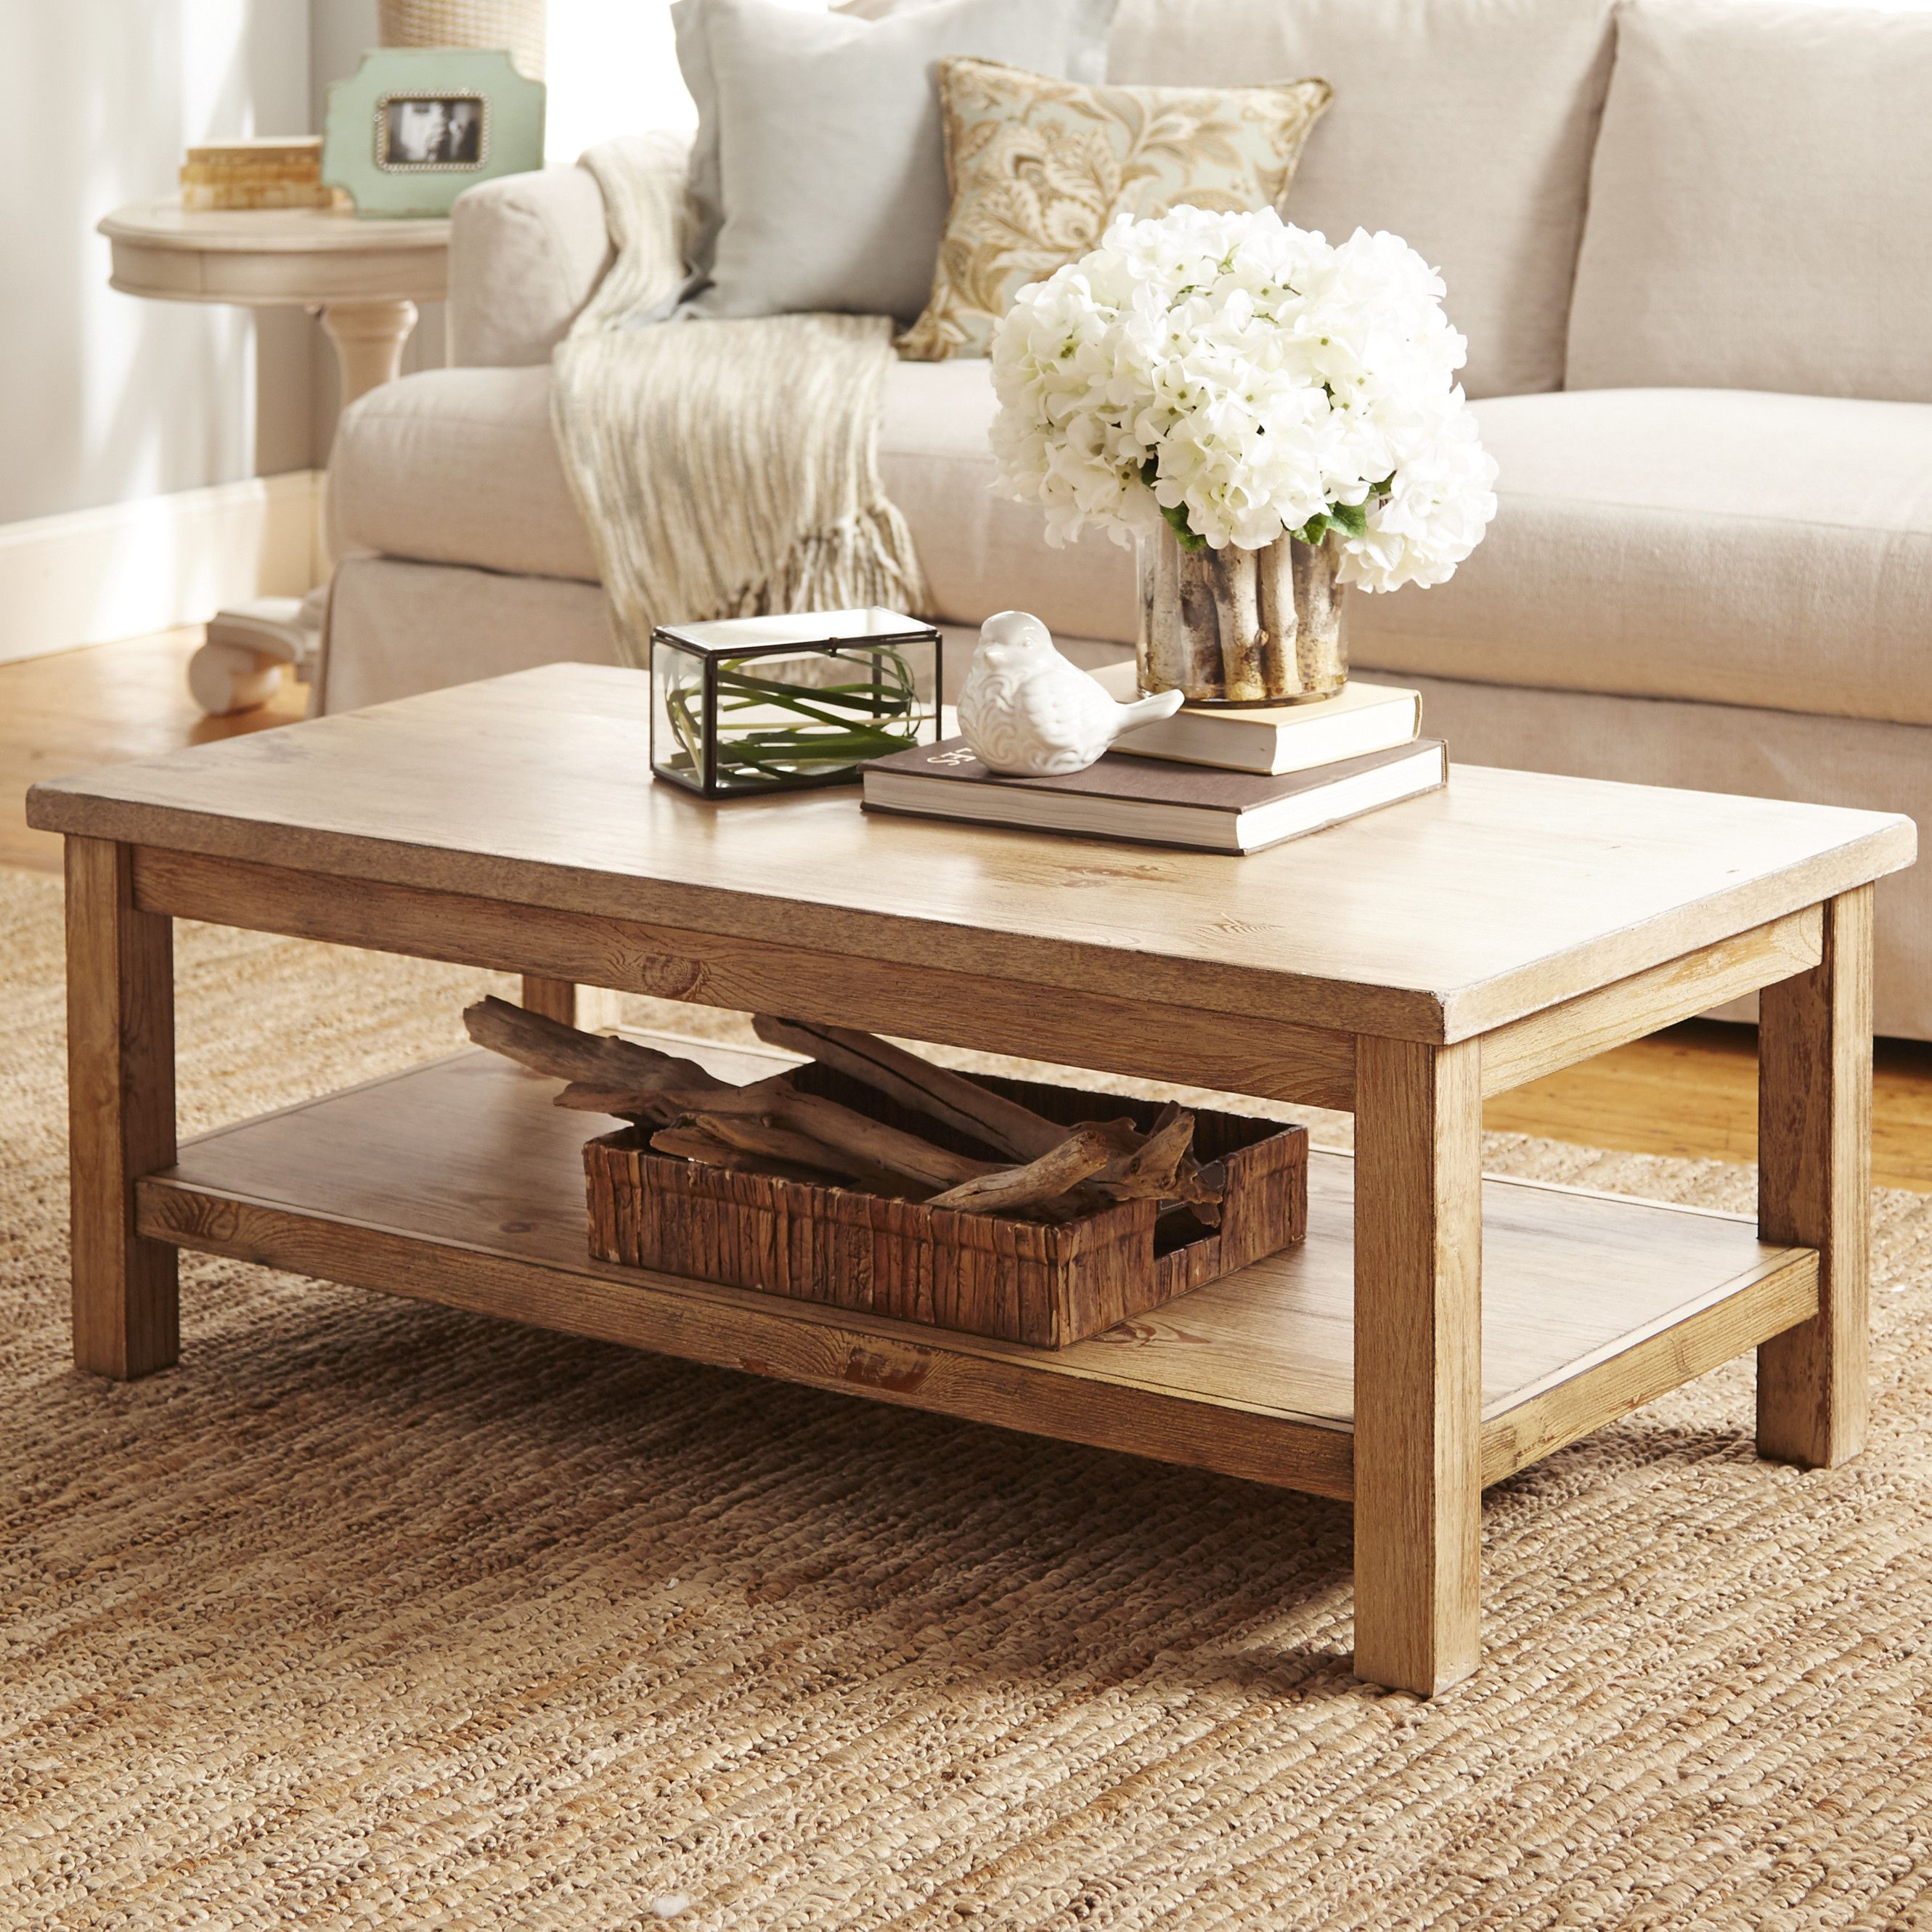 August Grove Flores Coffee Table Coffee Table In 2019 Home intended for sizing 2661 X 2661